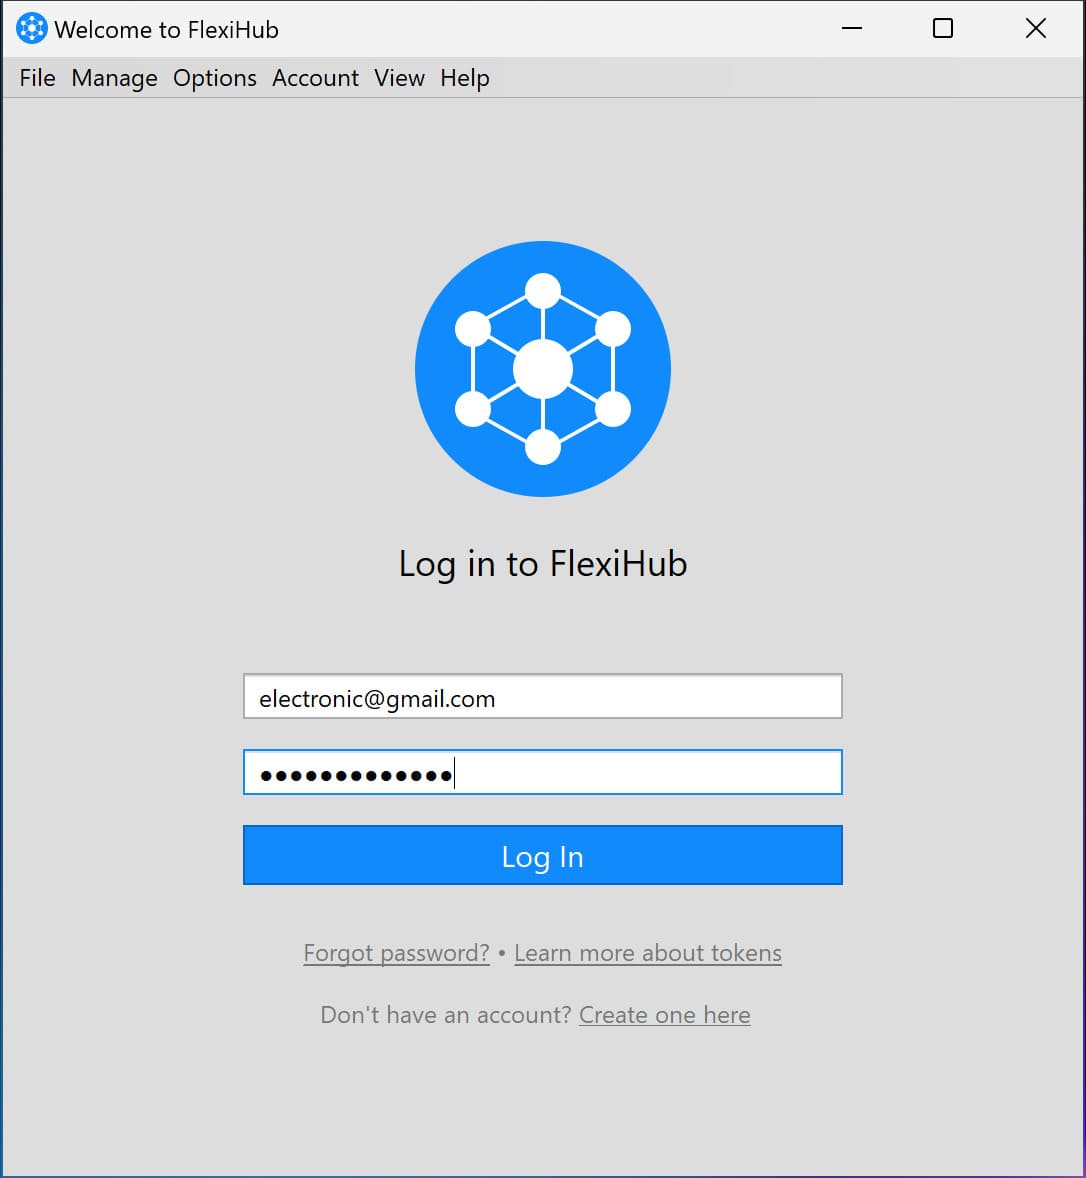 launch and log in FlexiHub